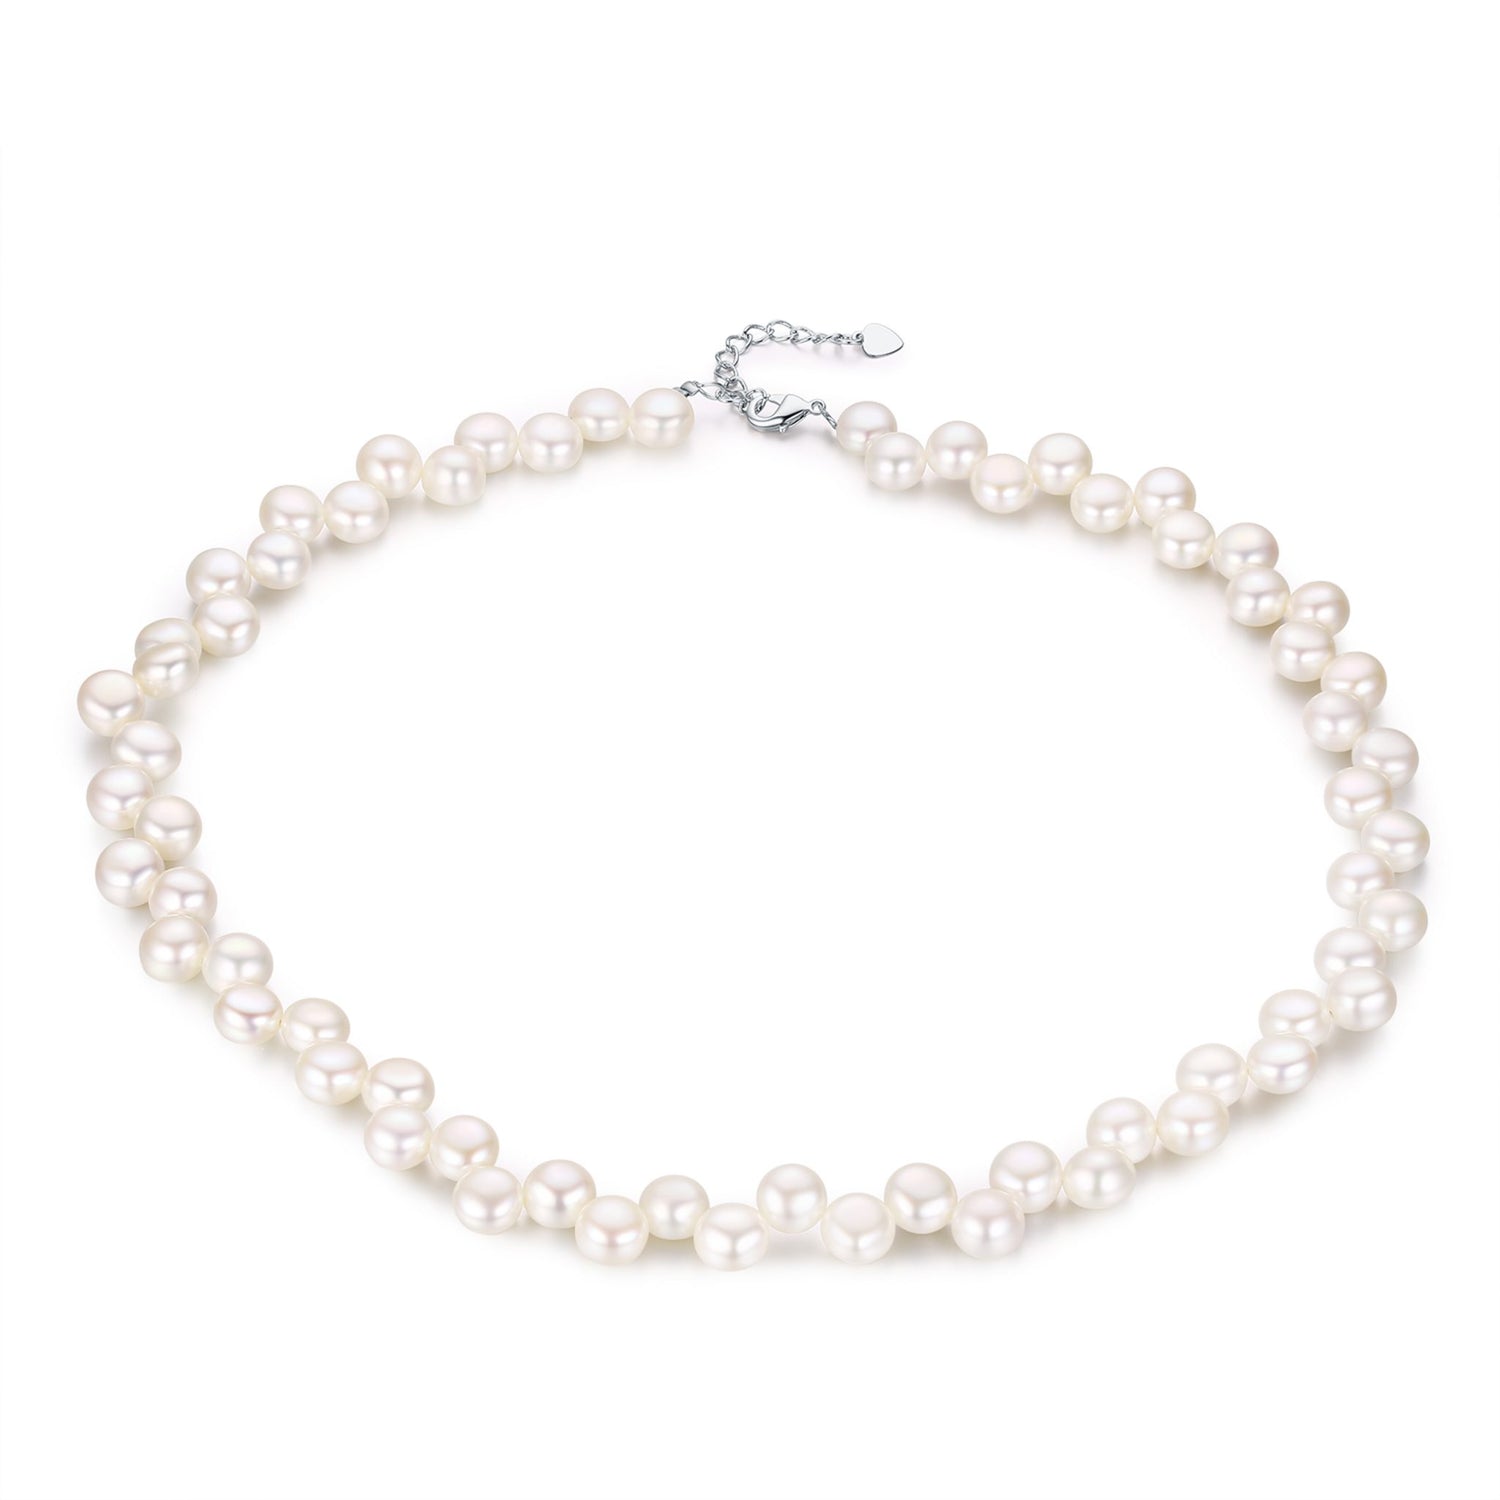 WHITE DANCING PEARL NECKLACE BRACELET SET – Timeless Pearl